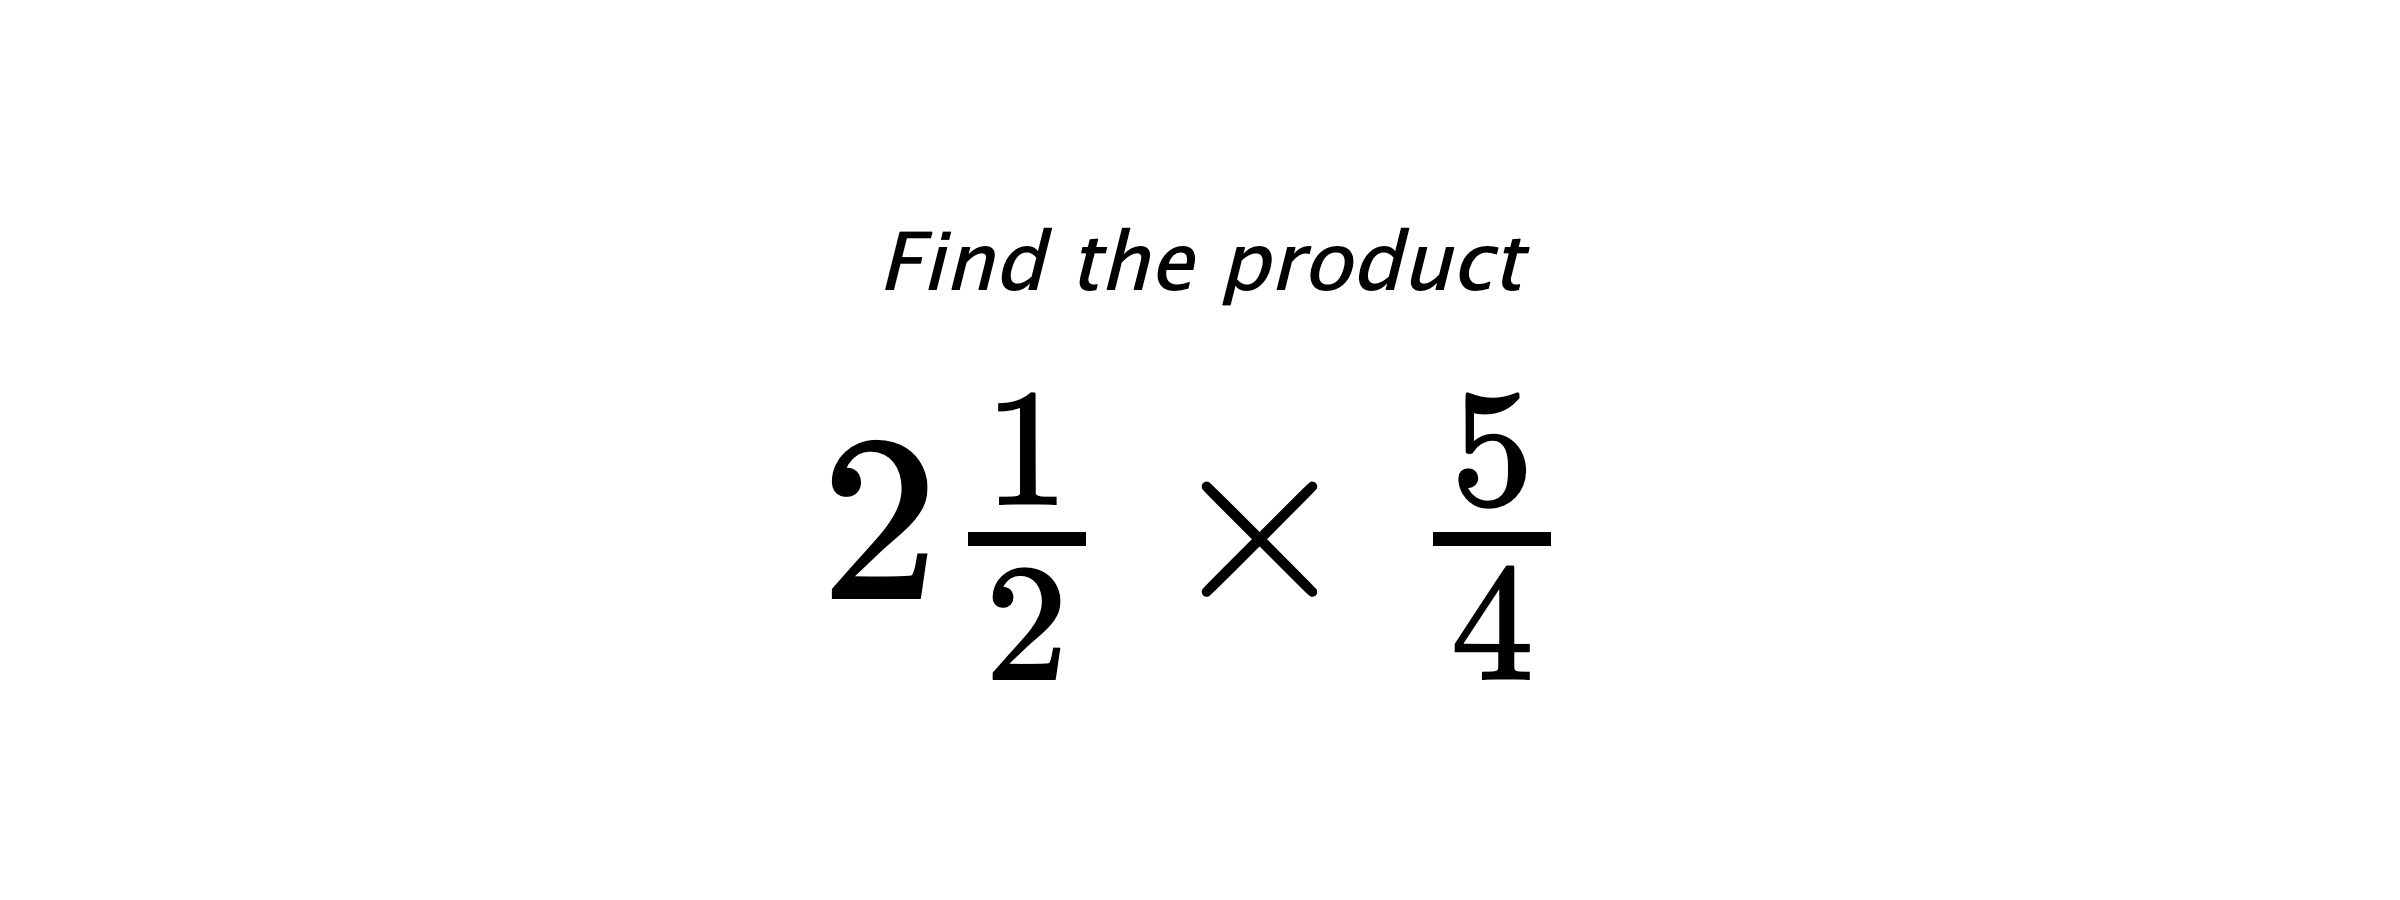 Find the product $ 2\frac{1}{2} \times \frac{5}{4} $